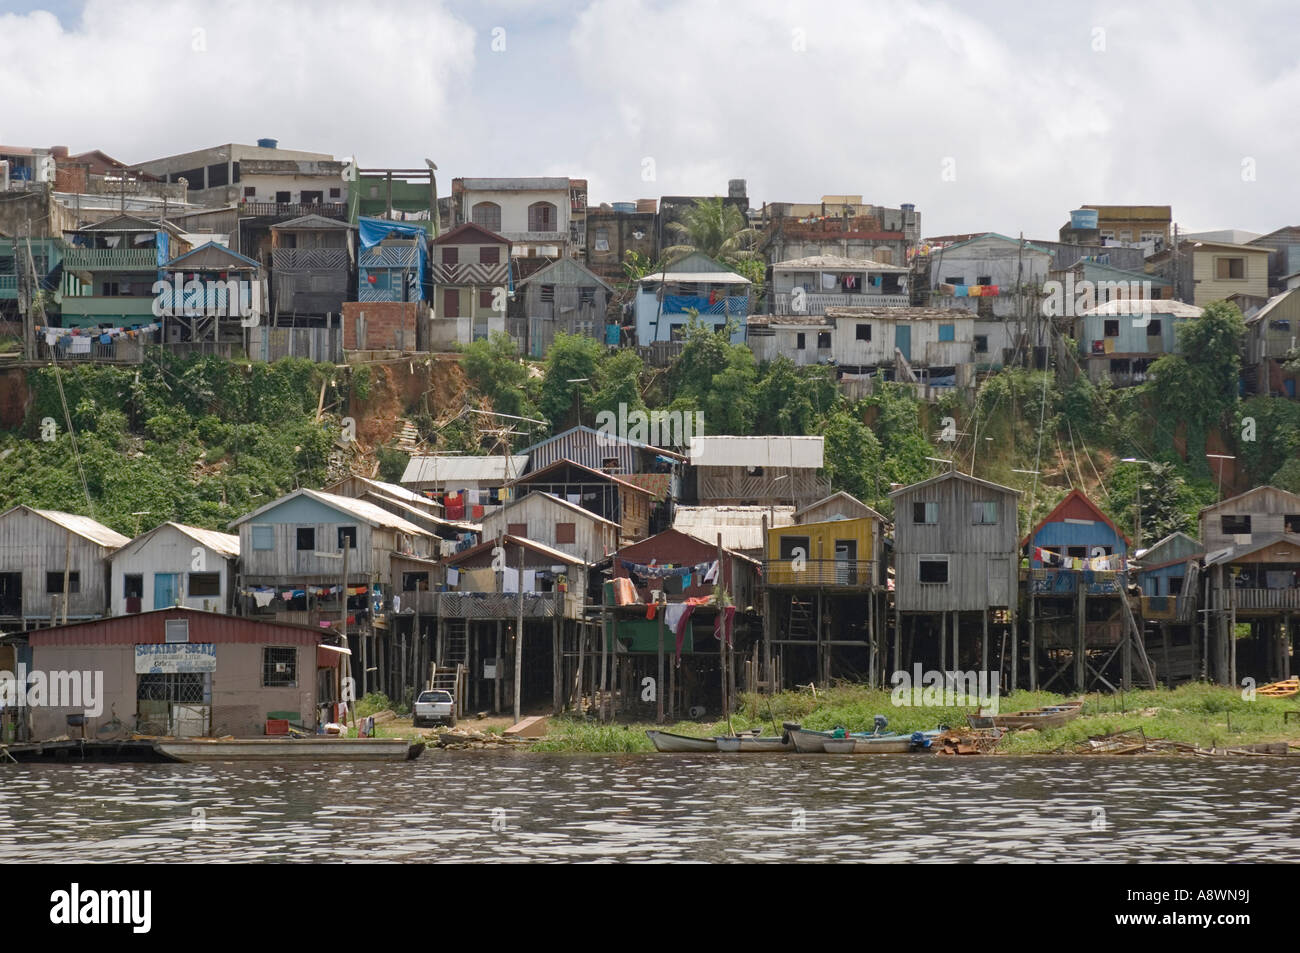 A favela area of Manaus taken from the river on the way out to see "the meeting of the waters" trip. Stock Photo